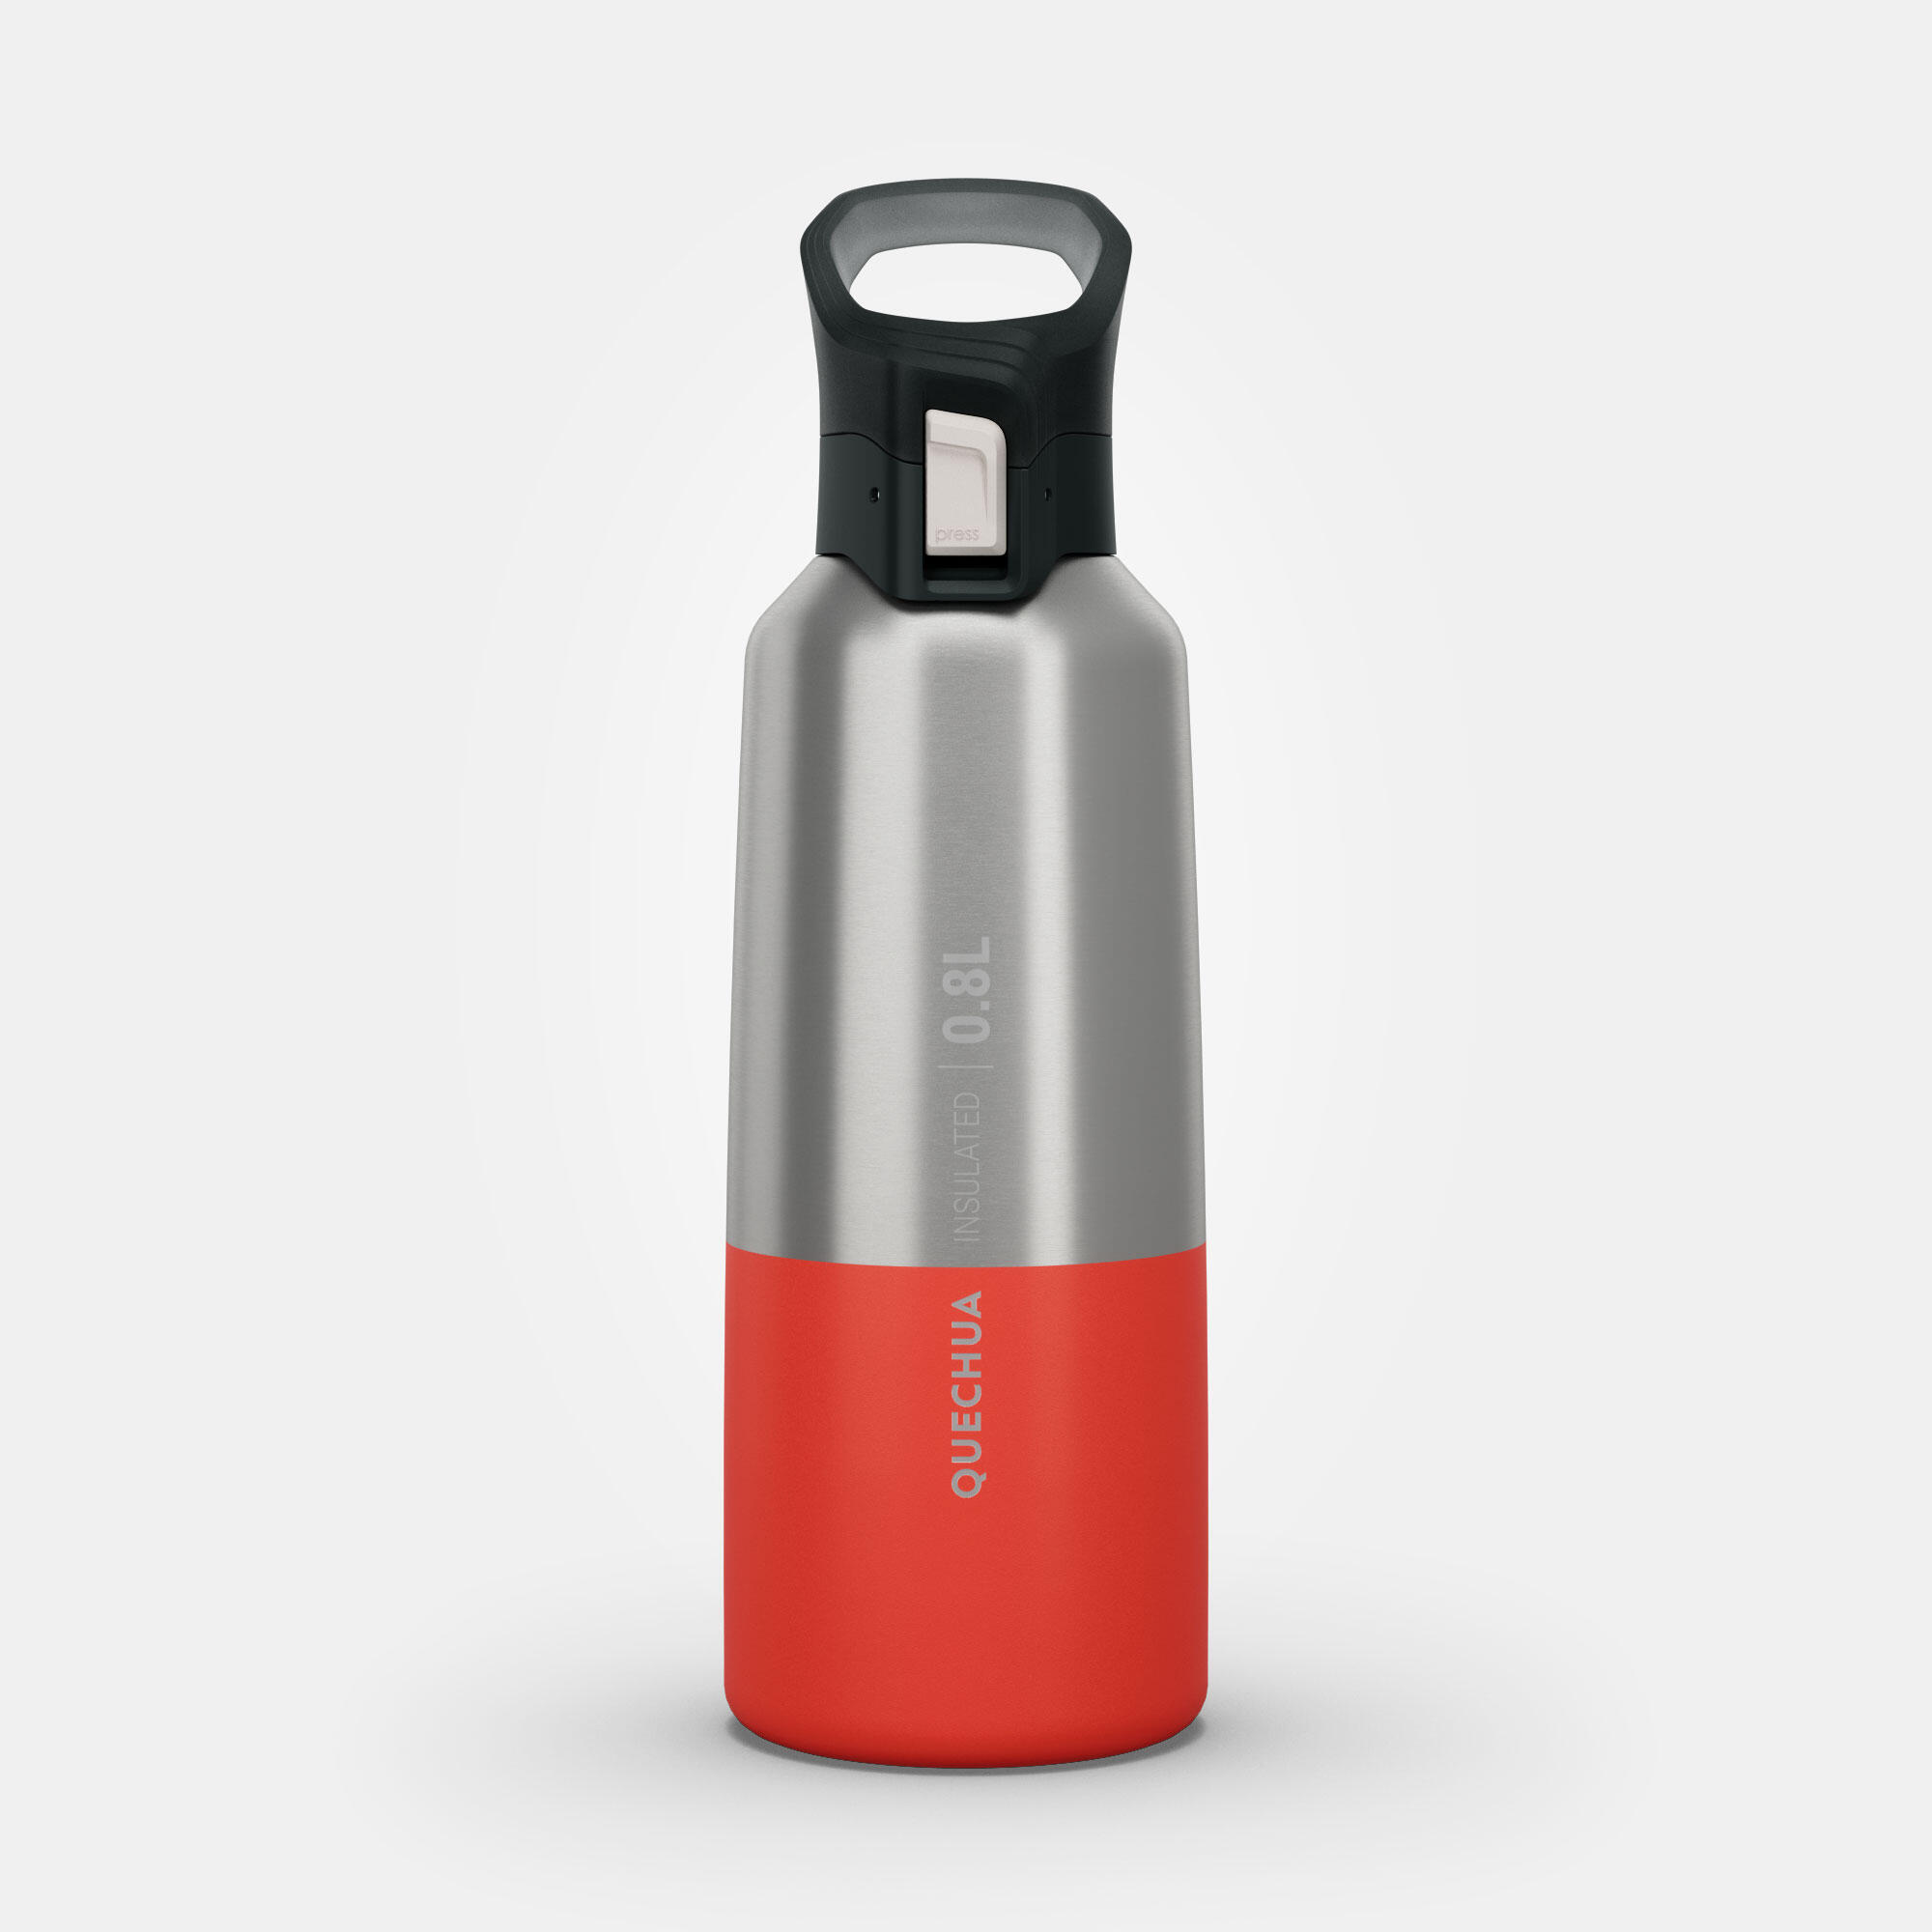 0.8 L stainless steel water bottle with quick-open cap for hiking - Red 12/35